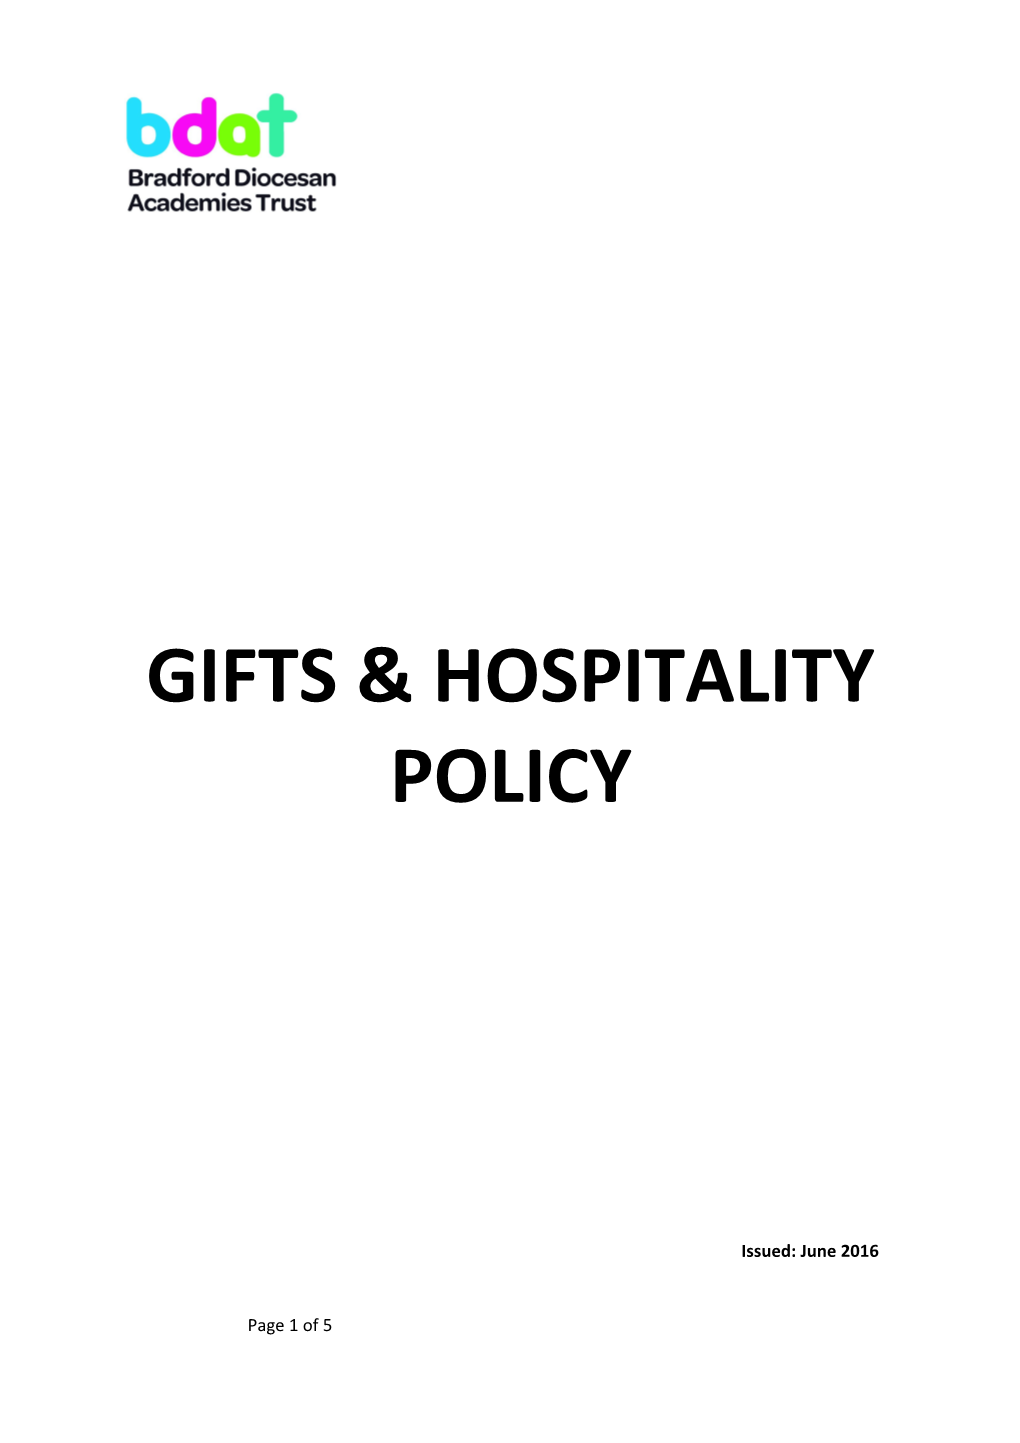 Gifts & Hospitality Policy